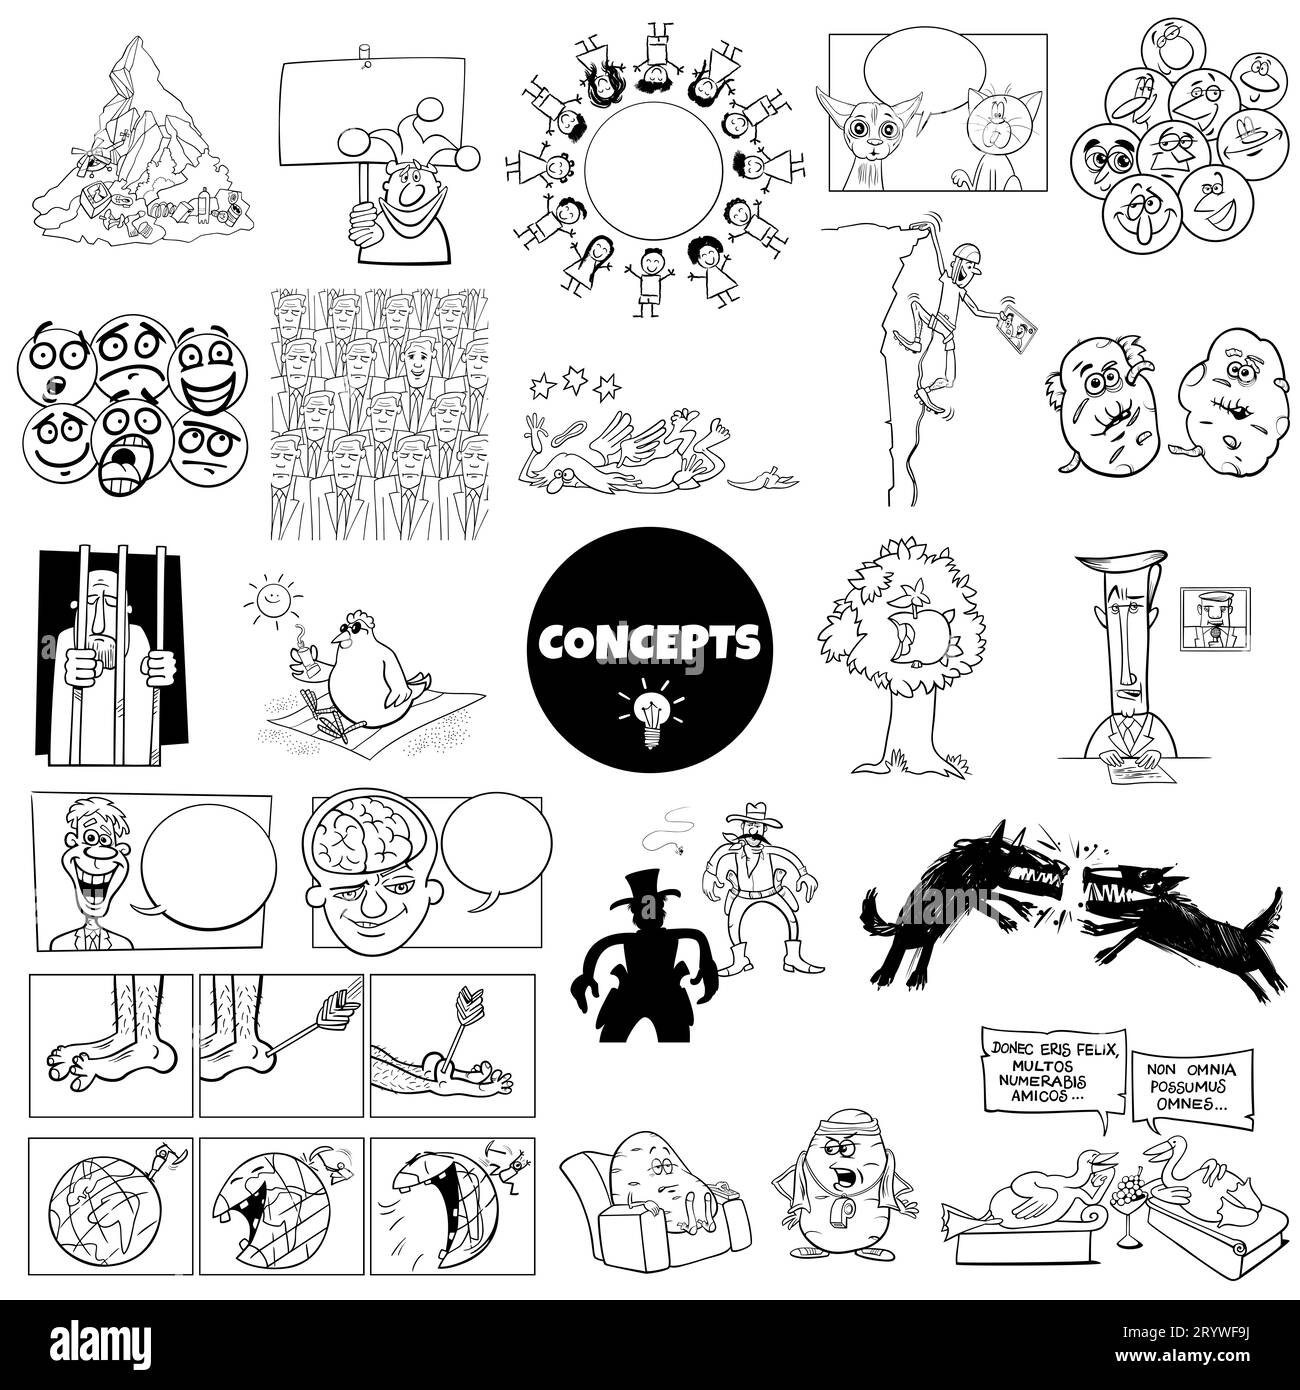 Black and white ilustration set of humorous cartoon concepts or metaphors and ideas with comic characters Stock Photo